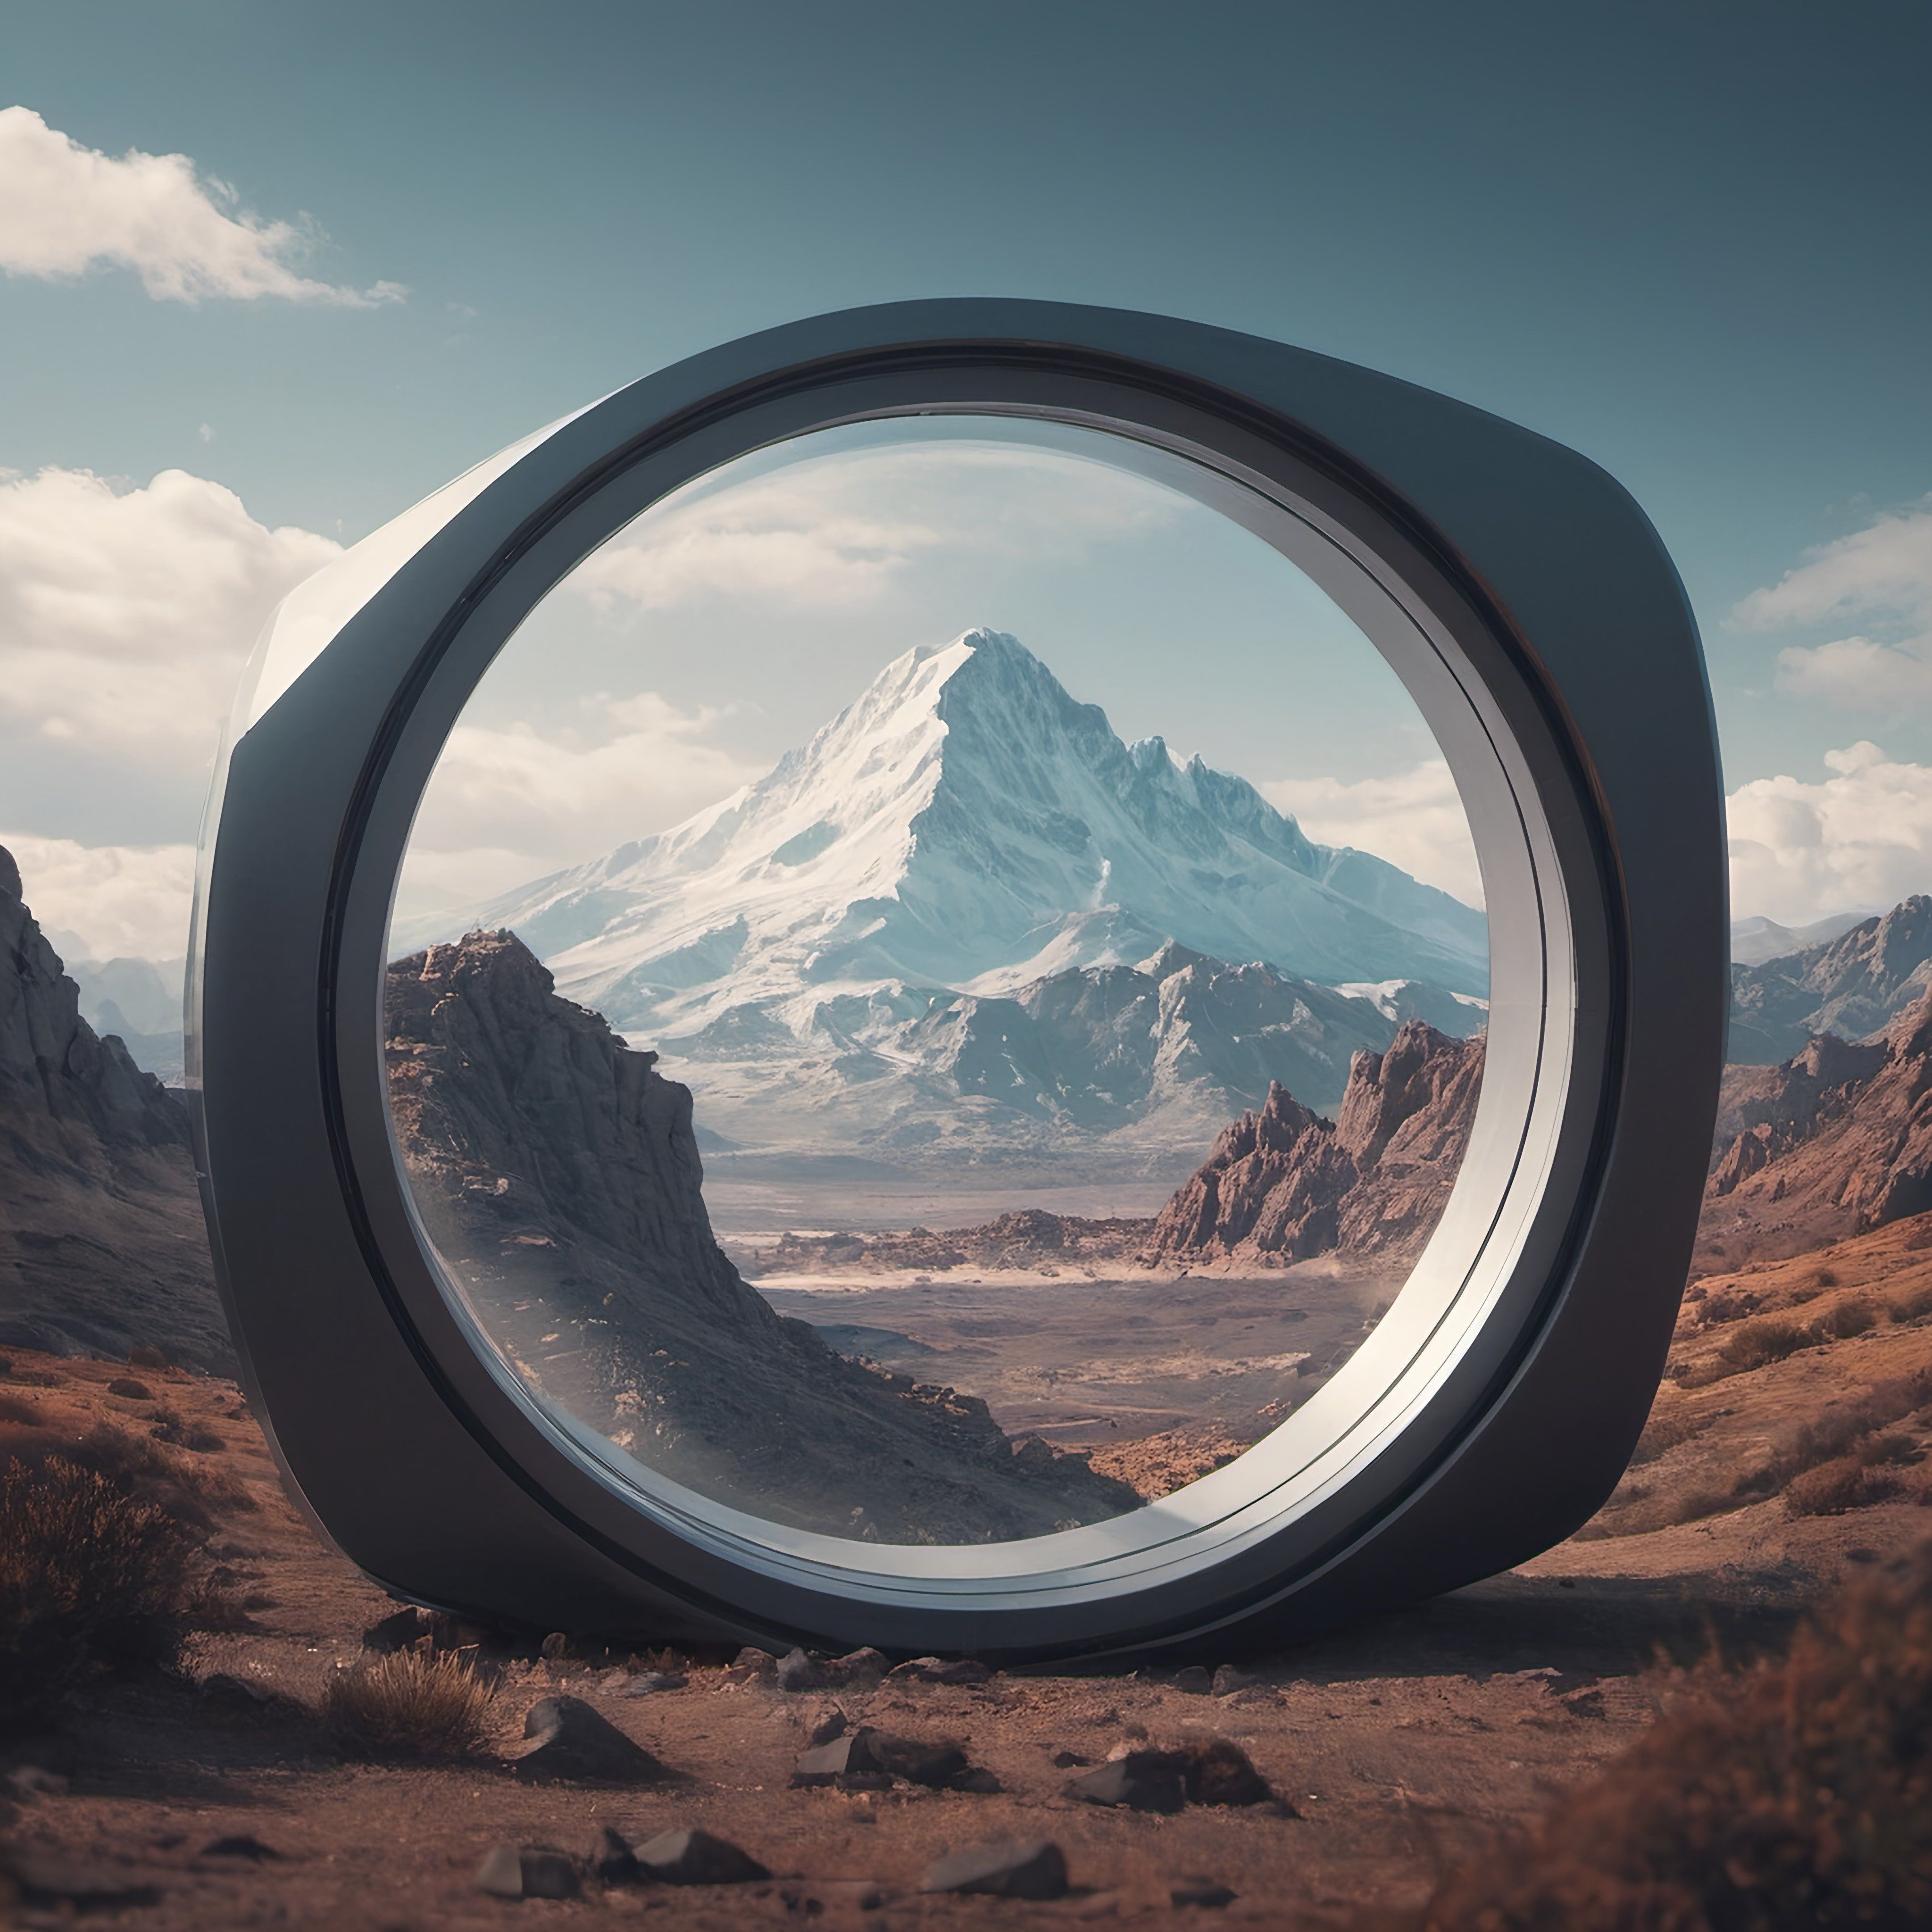 Prompt: a view of a mountain through a round window in a desert landscape with a mountain in the distance and a blue sky with clouds